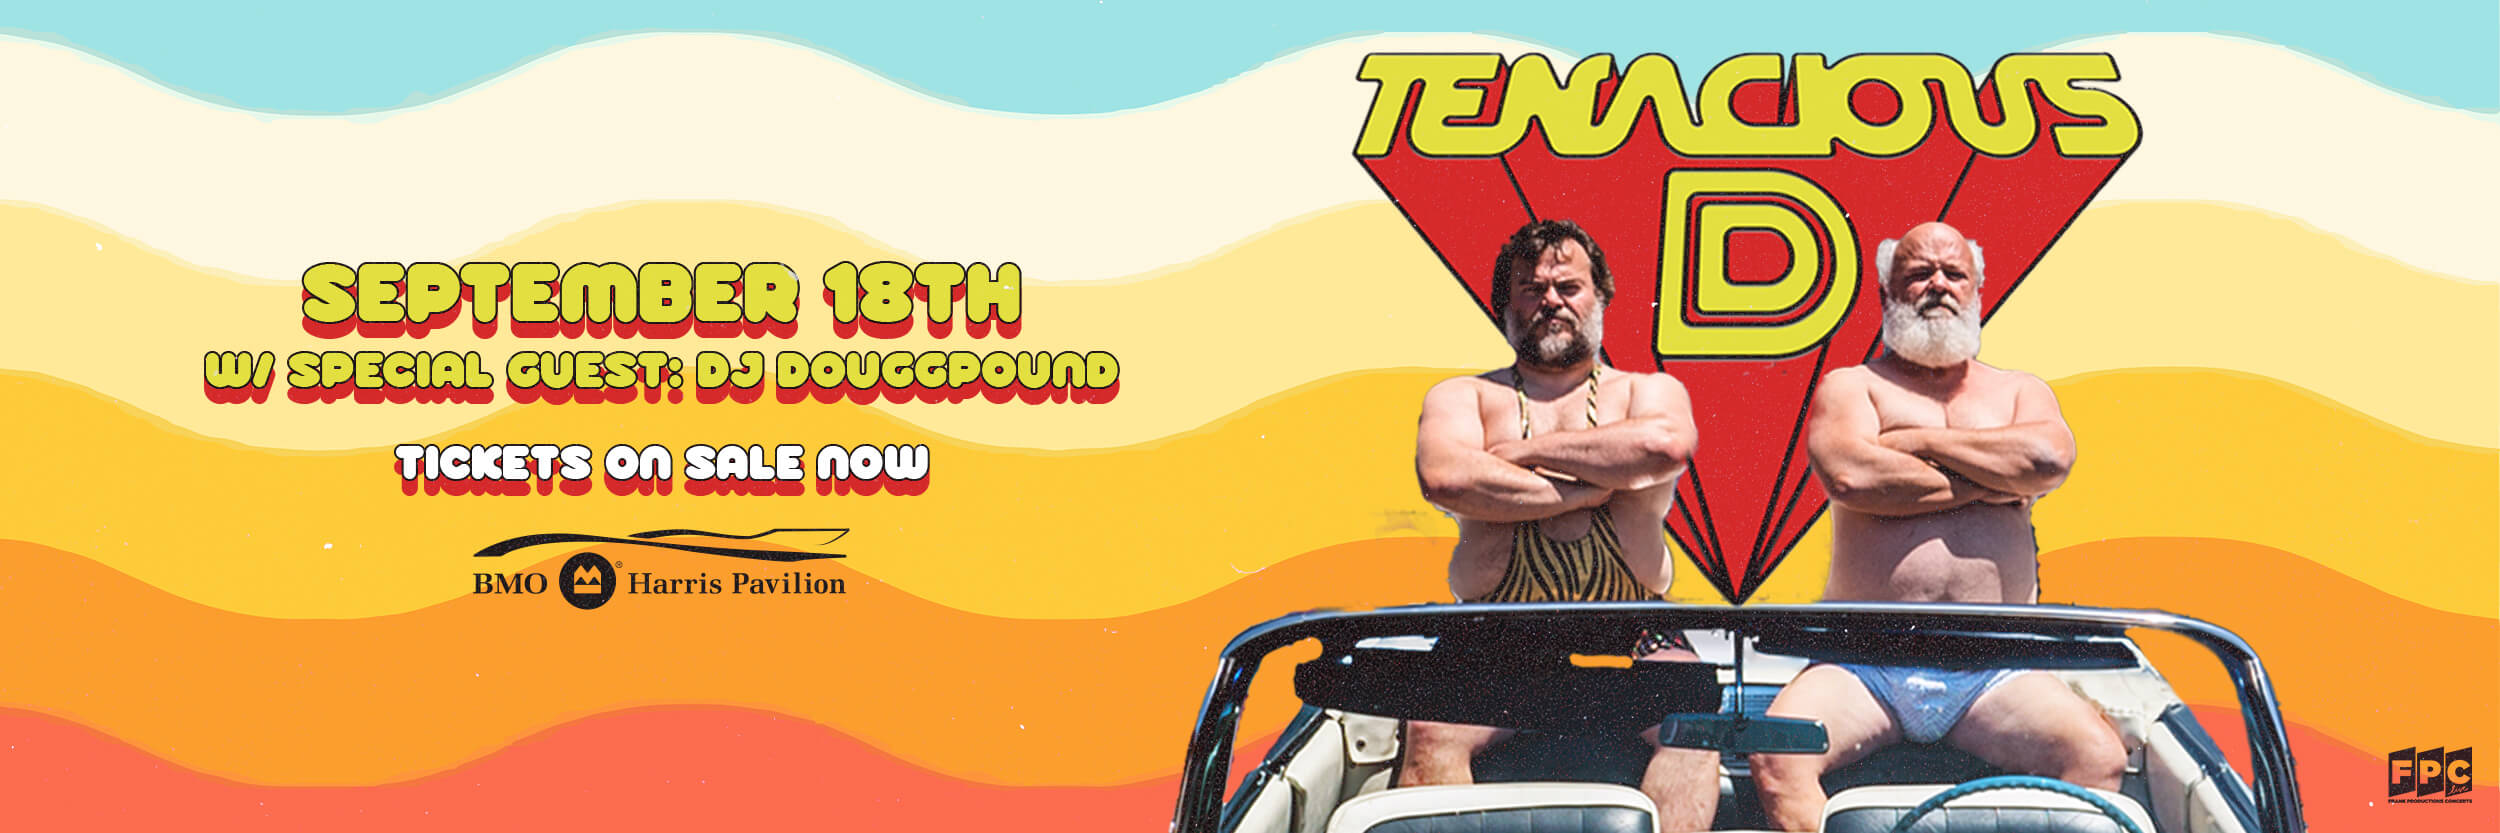 Tenacious D with special guest DJDouggpound